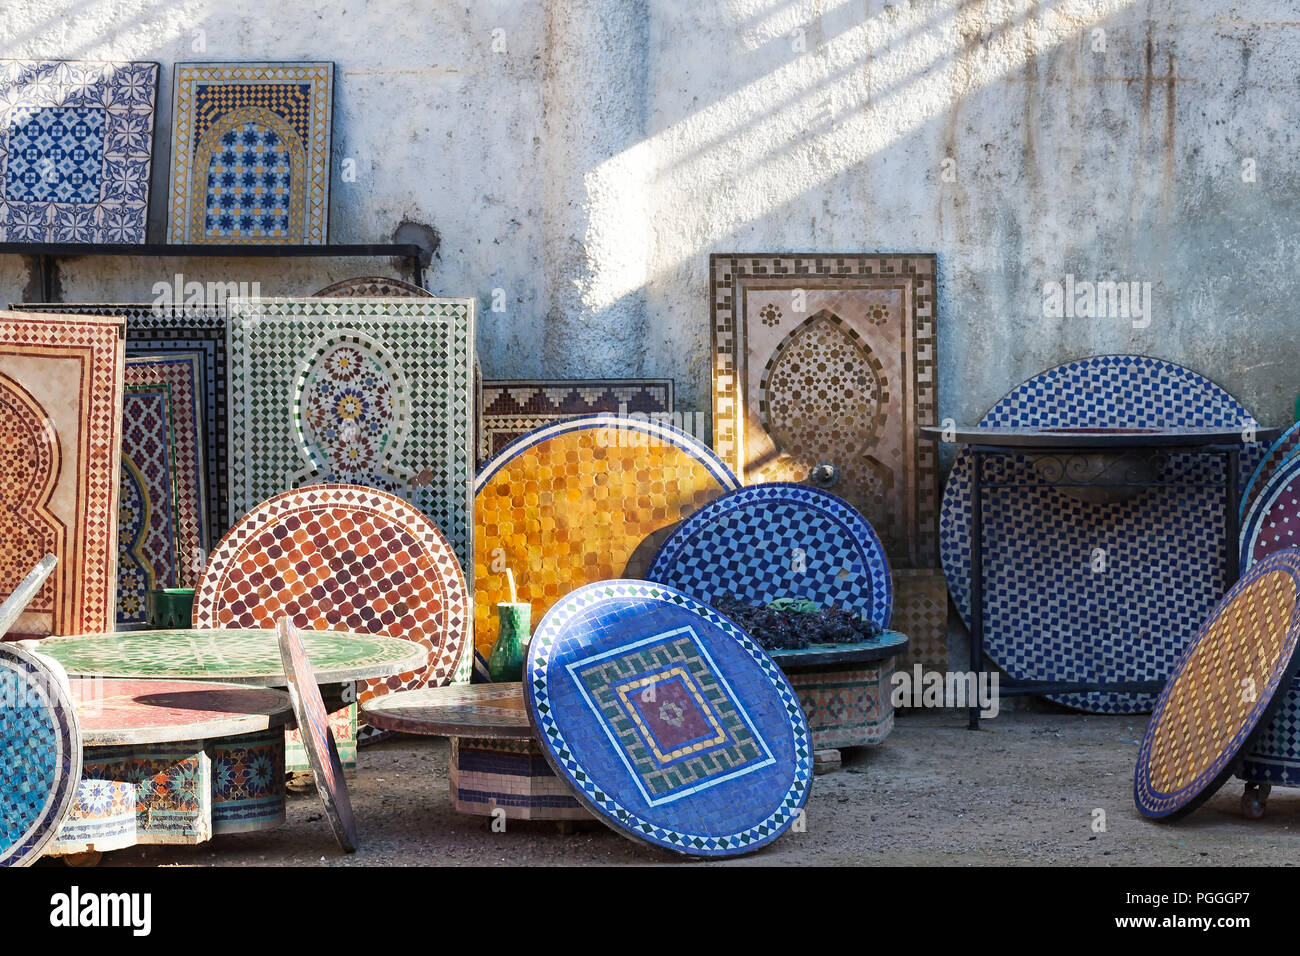 Morocco Fez, many mosaic tiled table tops and wall fountains at a local fabricator. Beautiful classic patters and colors. Copy space. Stock Photo